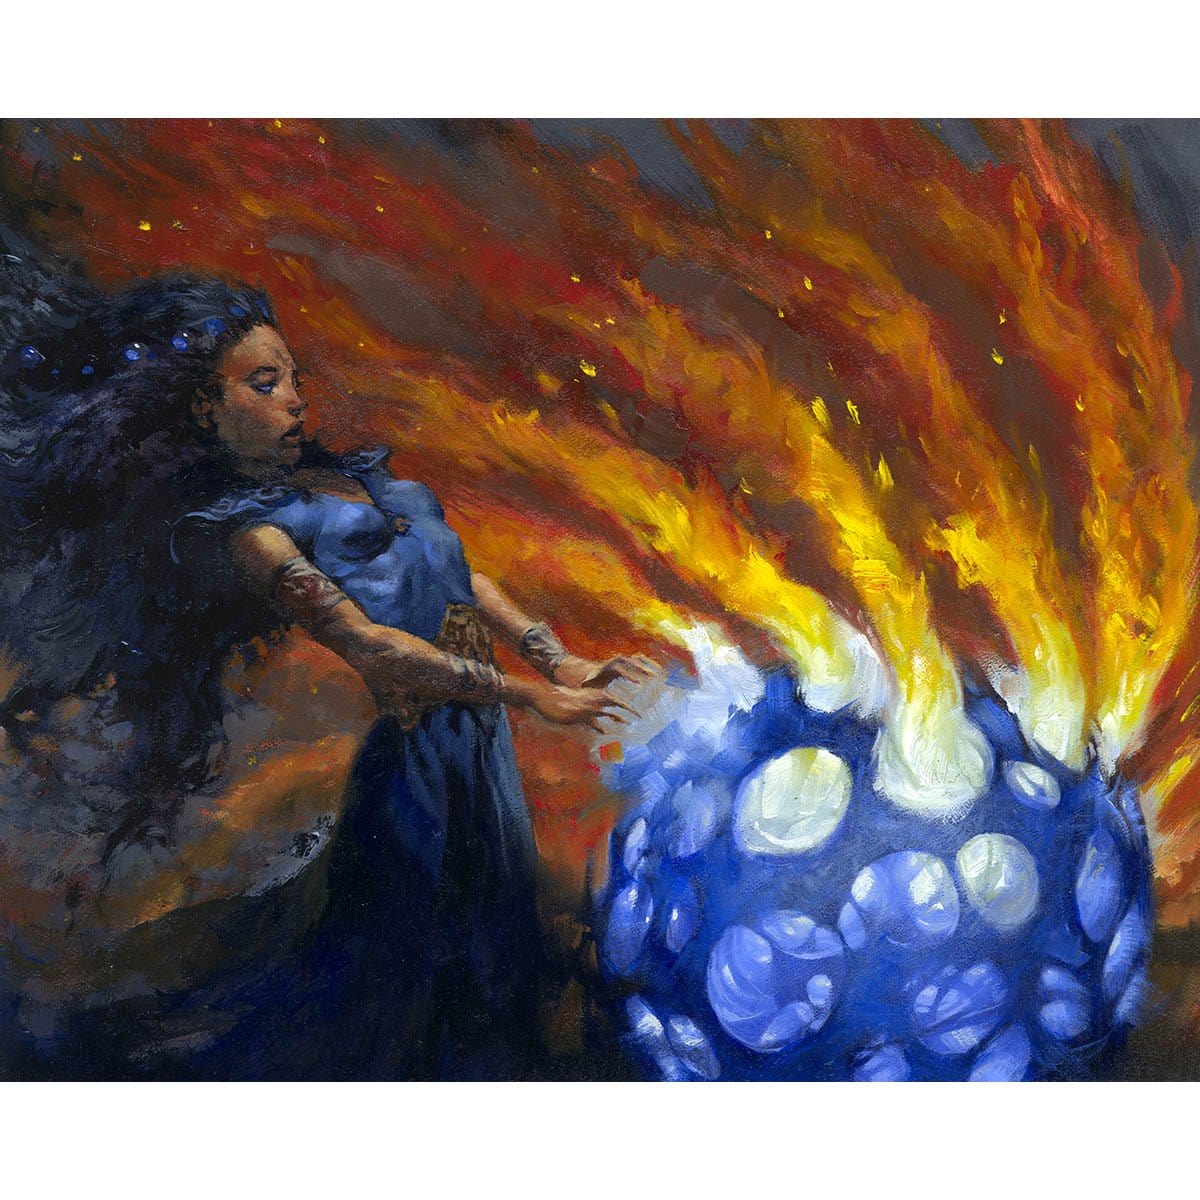 Blue Elemental Blast Print - Print - Original Magic Art - Accessories for Magic the Gathering and other card games